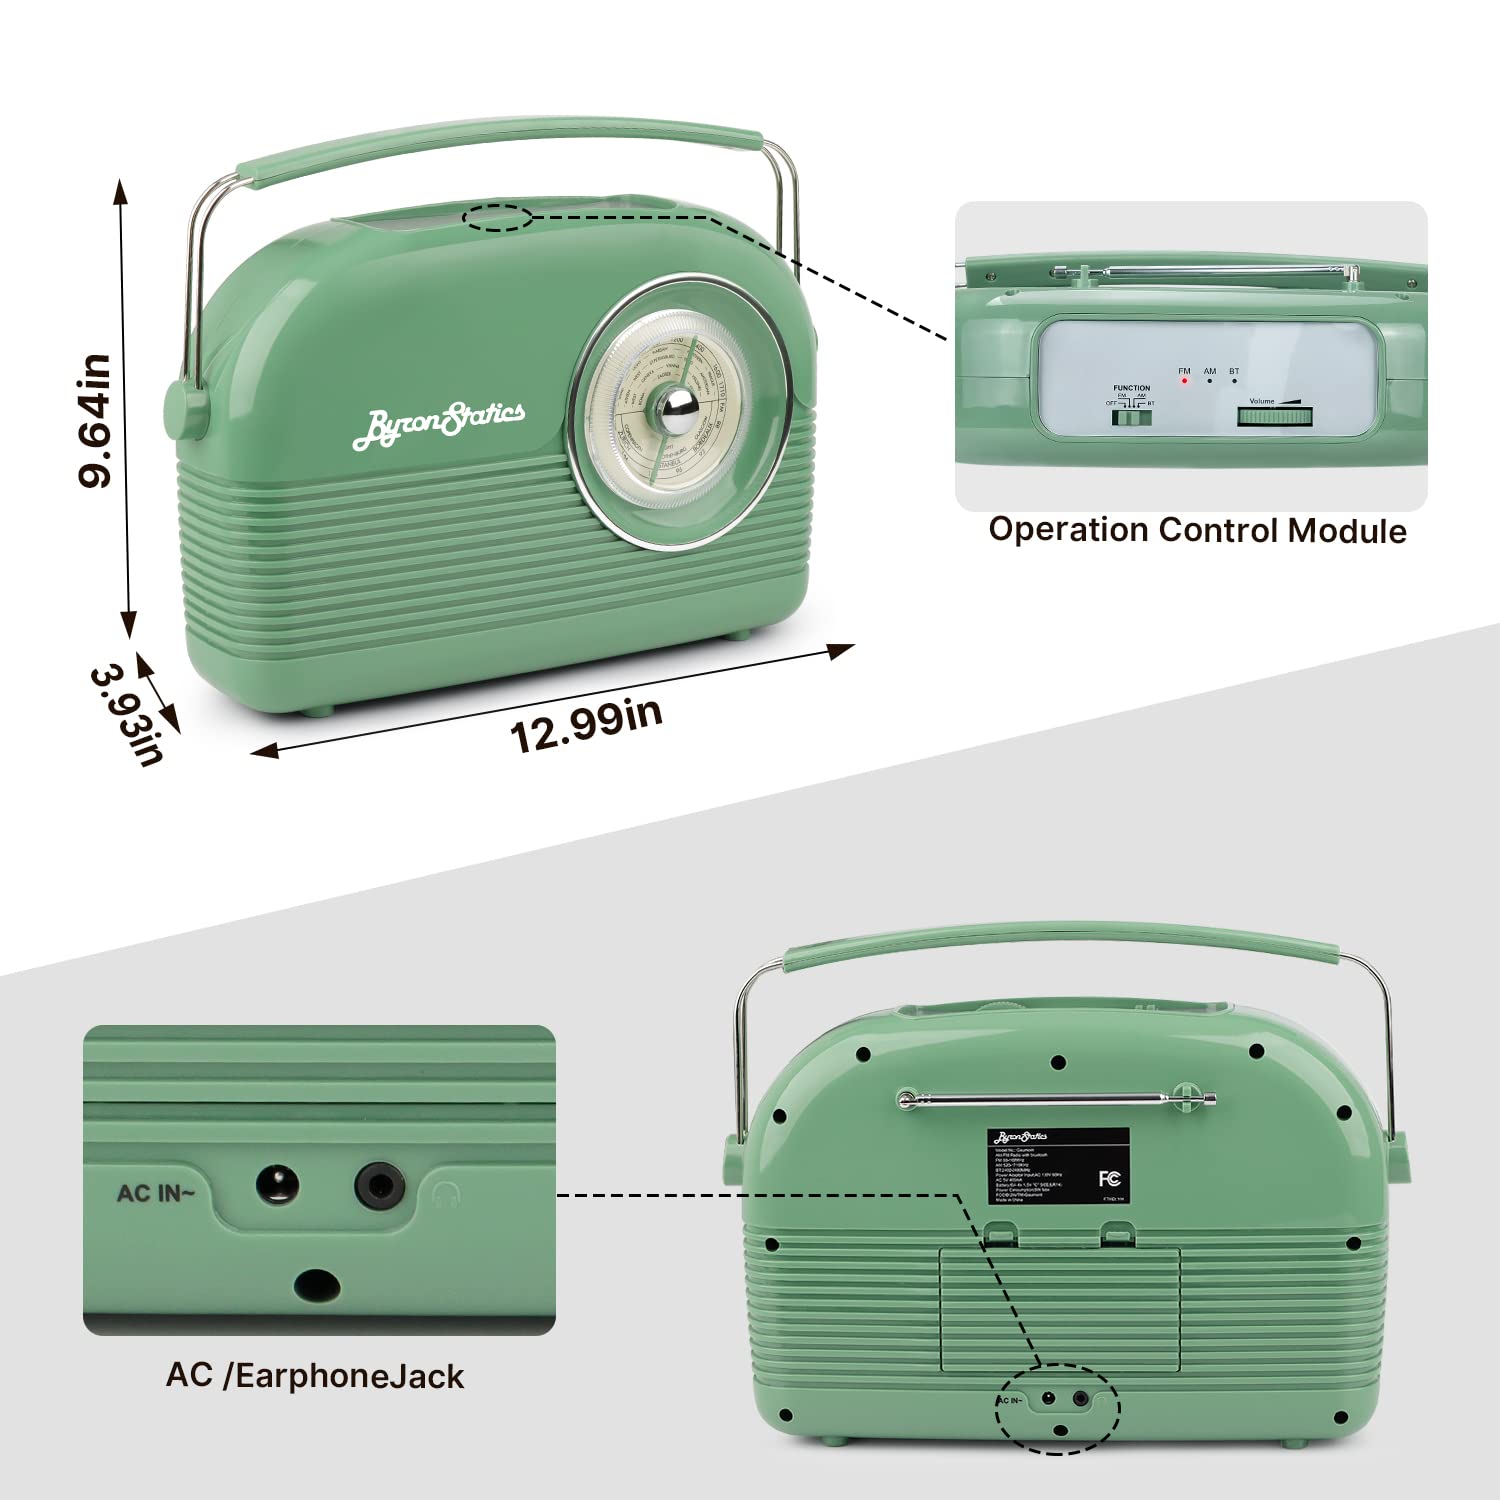 ByronStatics Radios,Teal AM/FM Radio,Blutooth Speaker,Portable Large Handle,AC 120V Power Adaptor Or Battery Operated,Large Dial Easy to Use,Tuning Knob,Telescopic Antenna,Headphone Jack